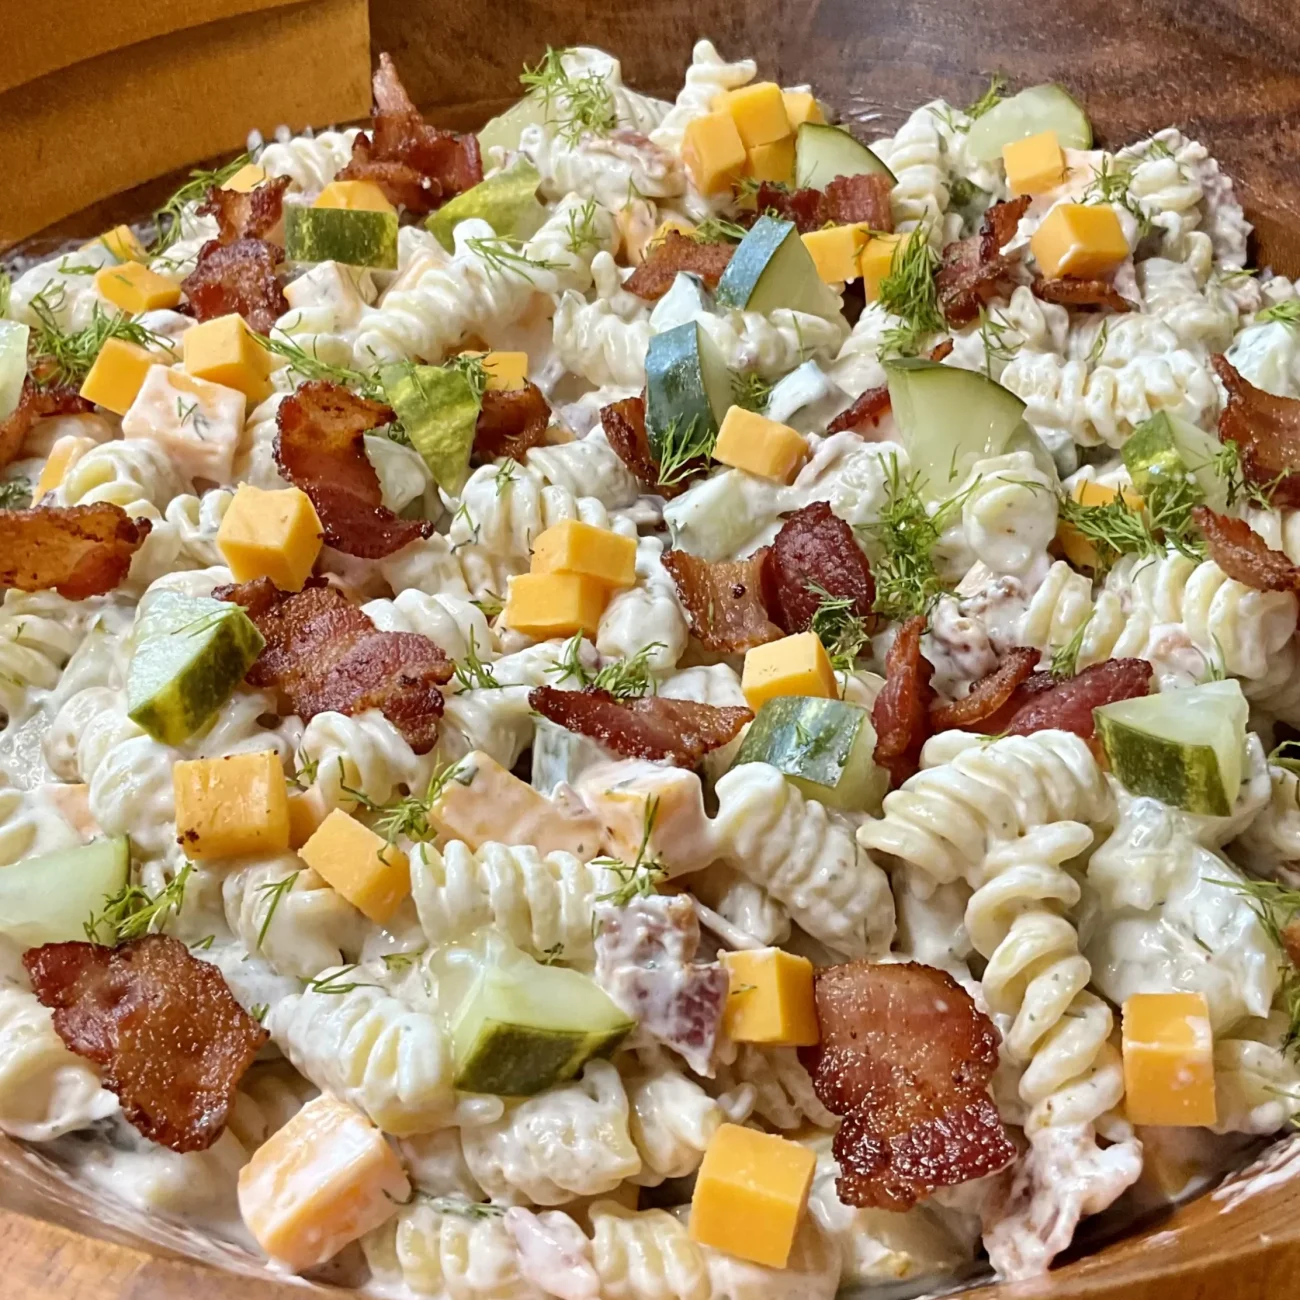 Pasta Salad With Dill